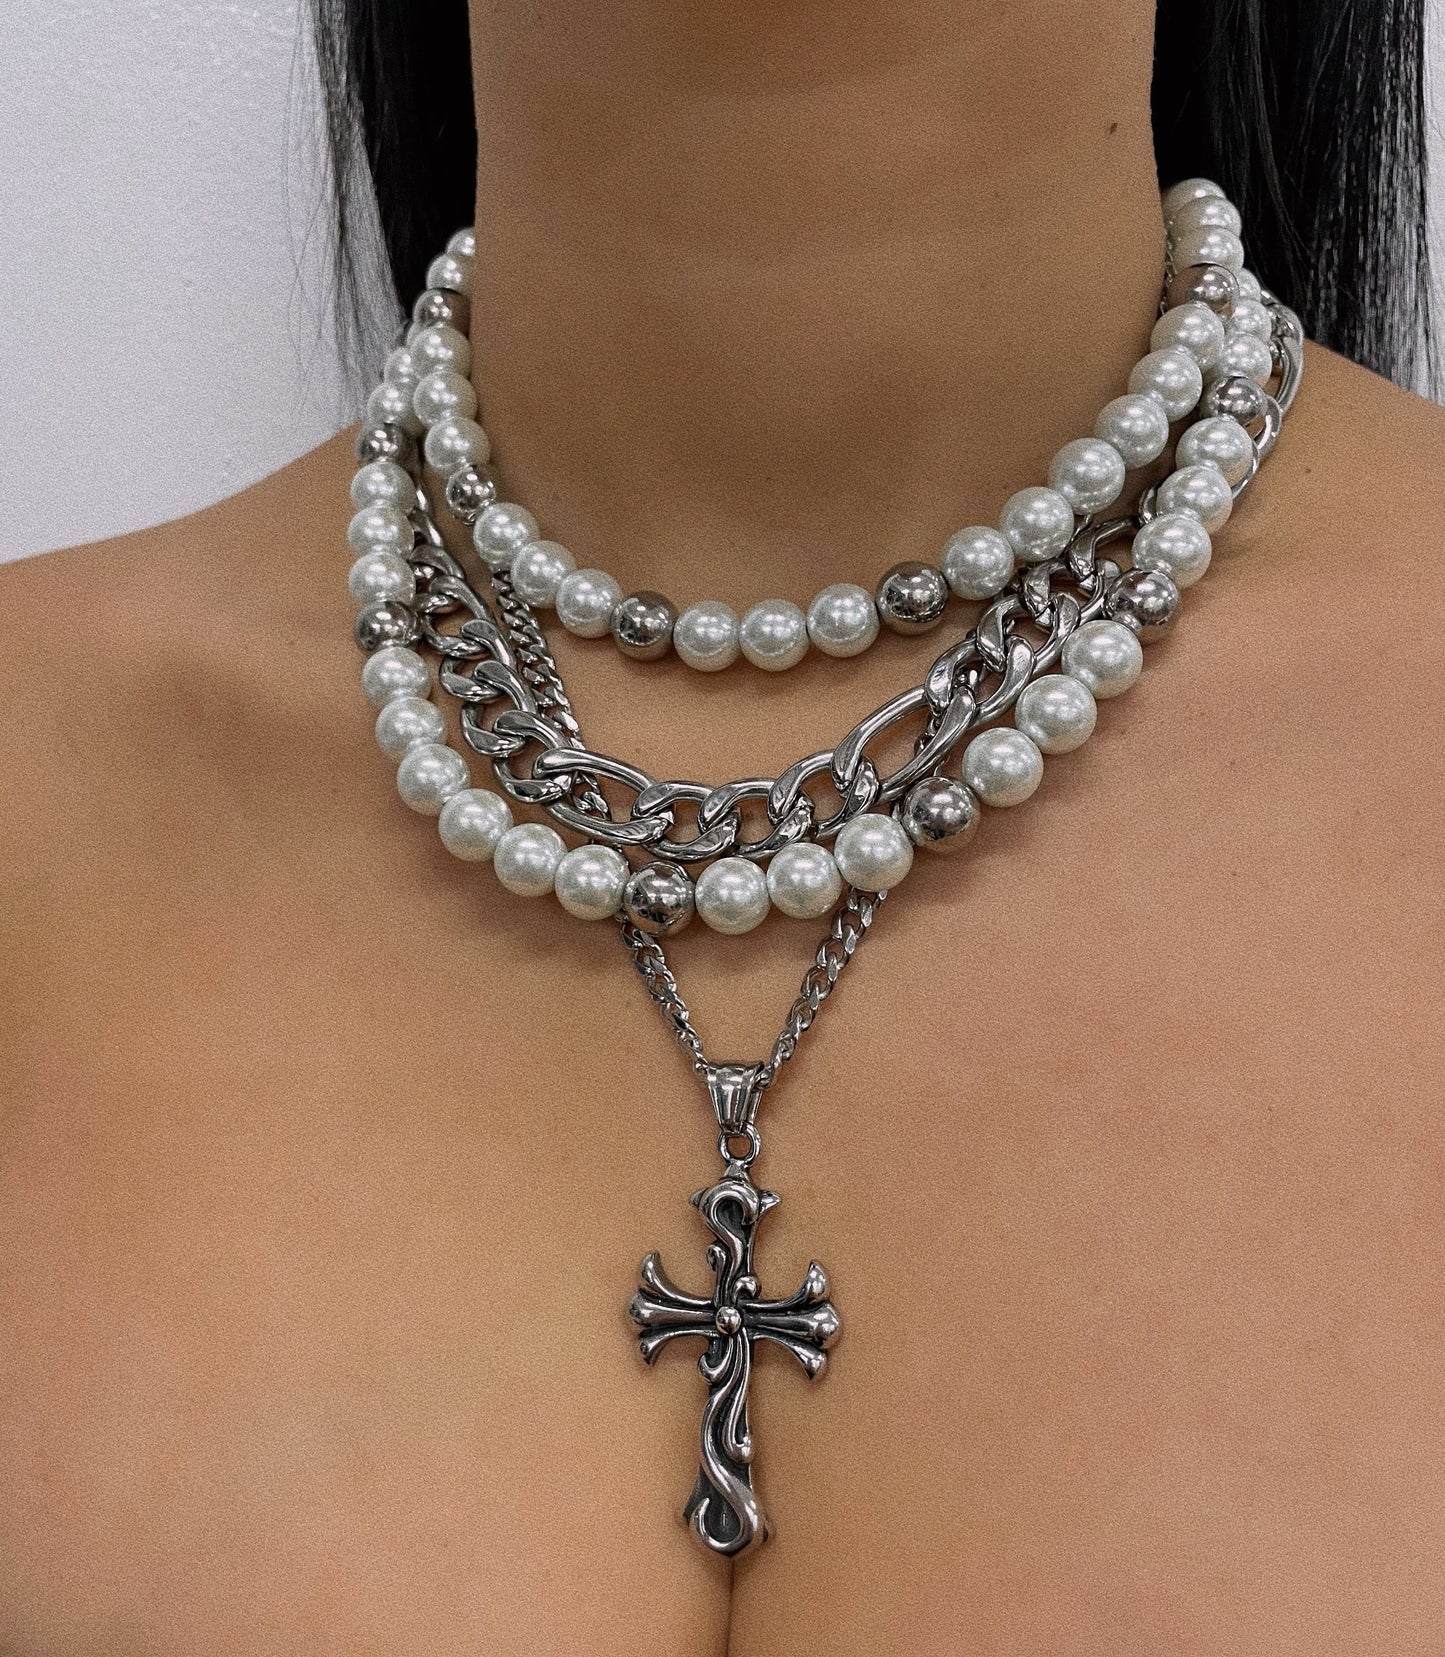 SILVER GOTHIC CROSS NECKLACE